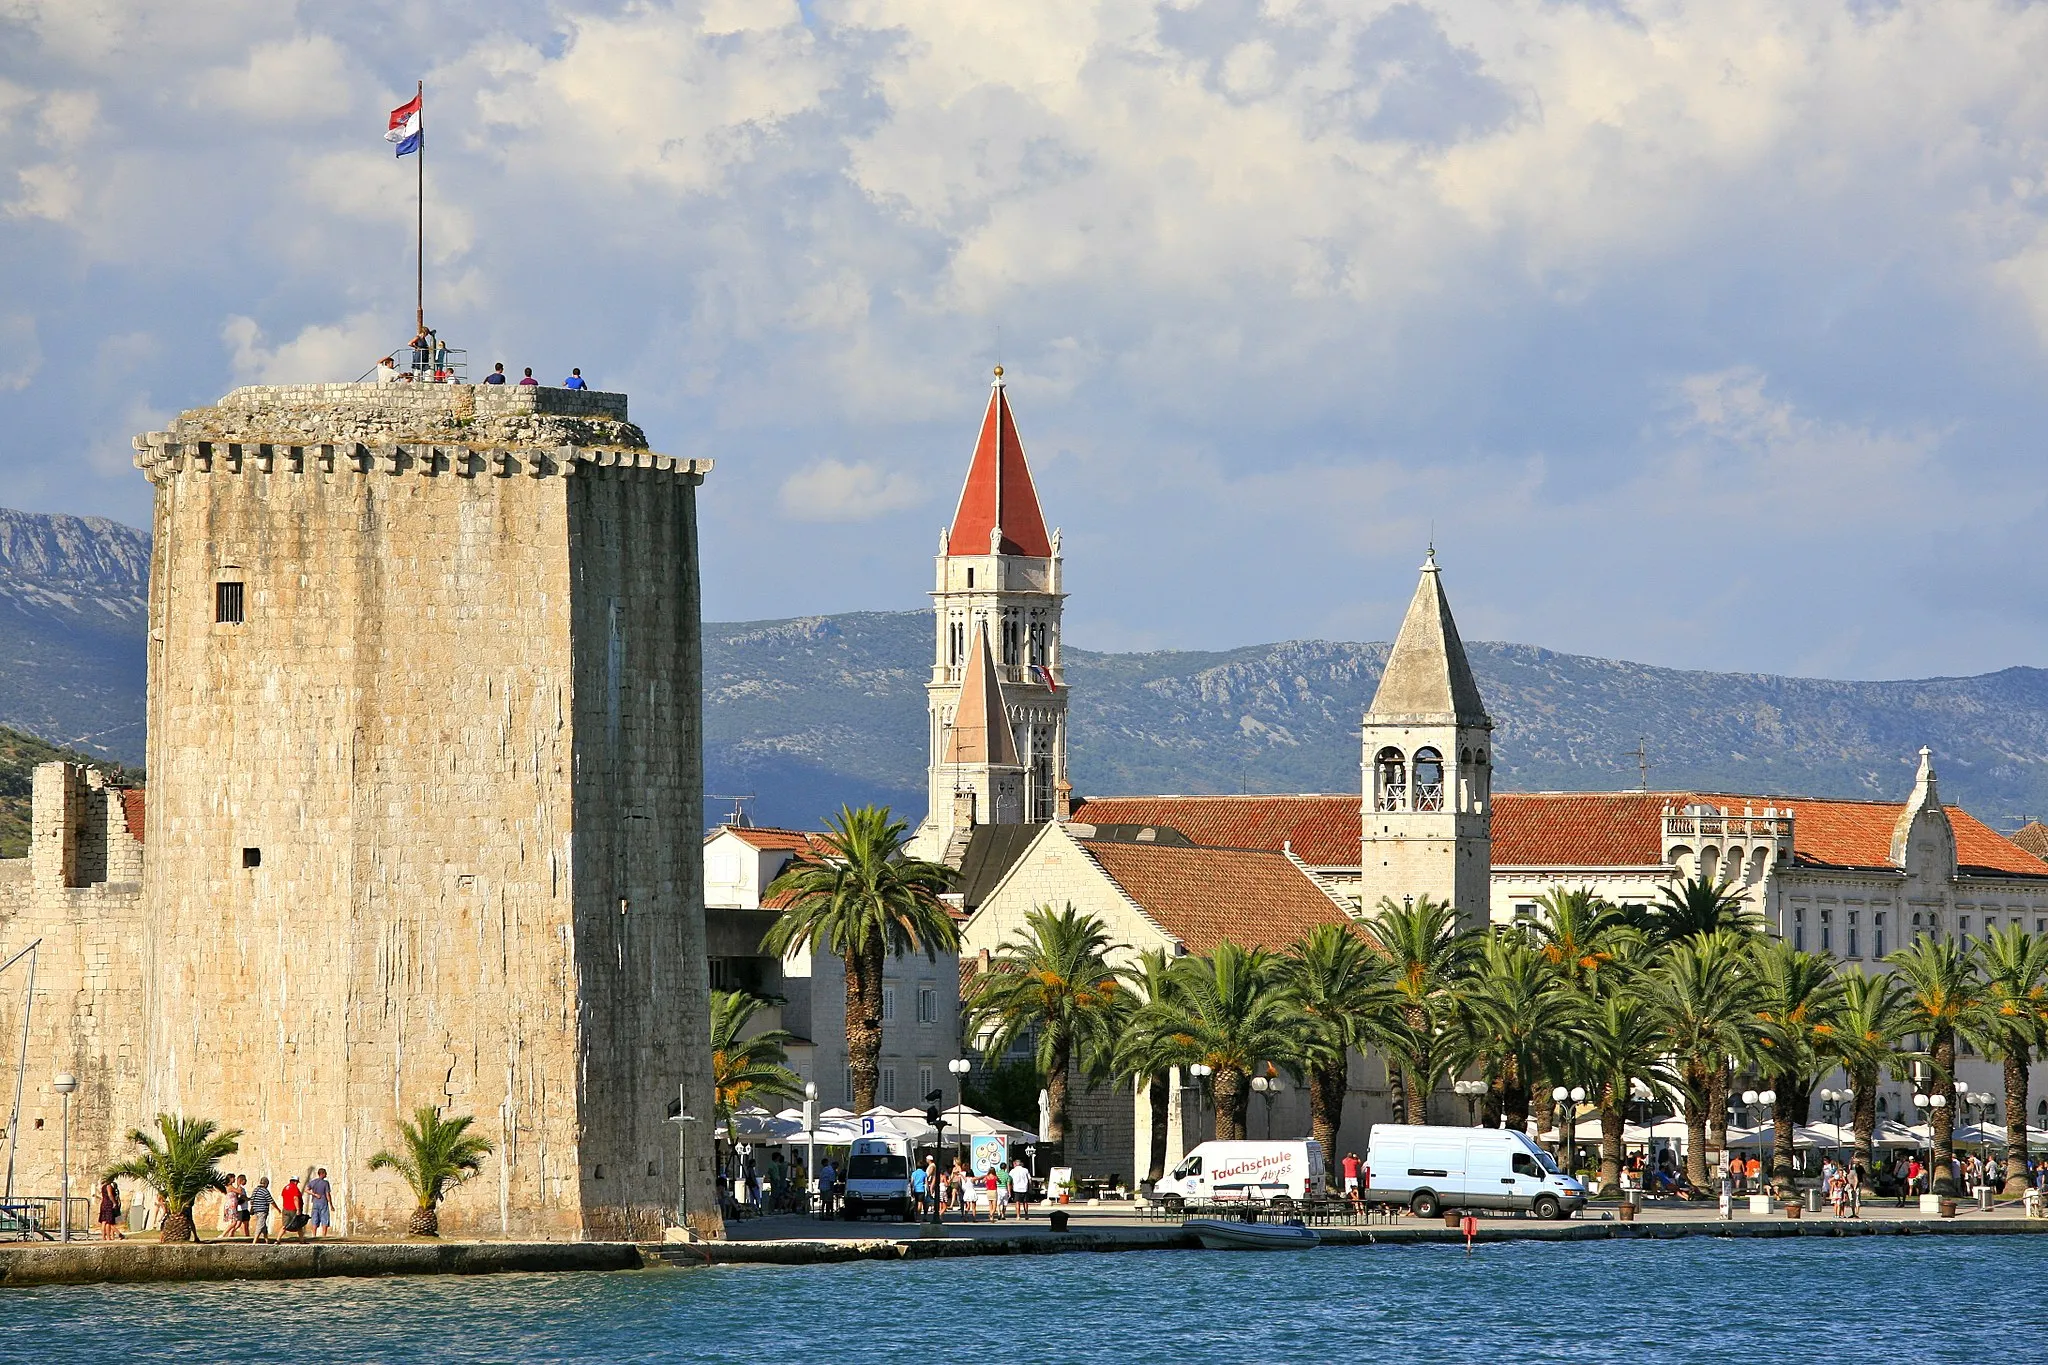 Photo showing: Trogir (Latin: Tragurium ; Greek: Τραγύριον or Τραγούριον,[1] Trogkir; Italian: Traù; Hungarian: Trau) is a historic town and harbour on the Adriatic coast in Split-Dalmatia County, Croatia, with a population of 12,995 (2001)[2] and a total municipality population of 13,322 (2001). The historic city of Trogir is situated on a small island between the Croatian mainland and the island of Čiovo.[3] It lies 27 kilometres west of the city of Split.